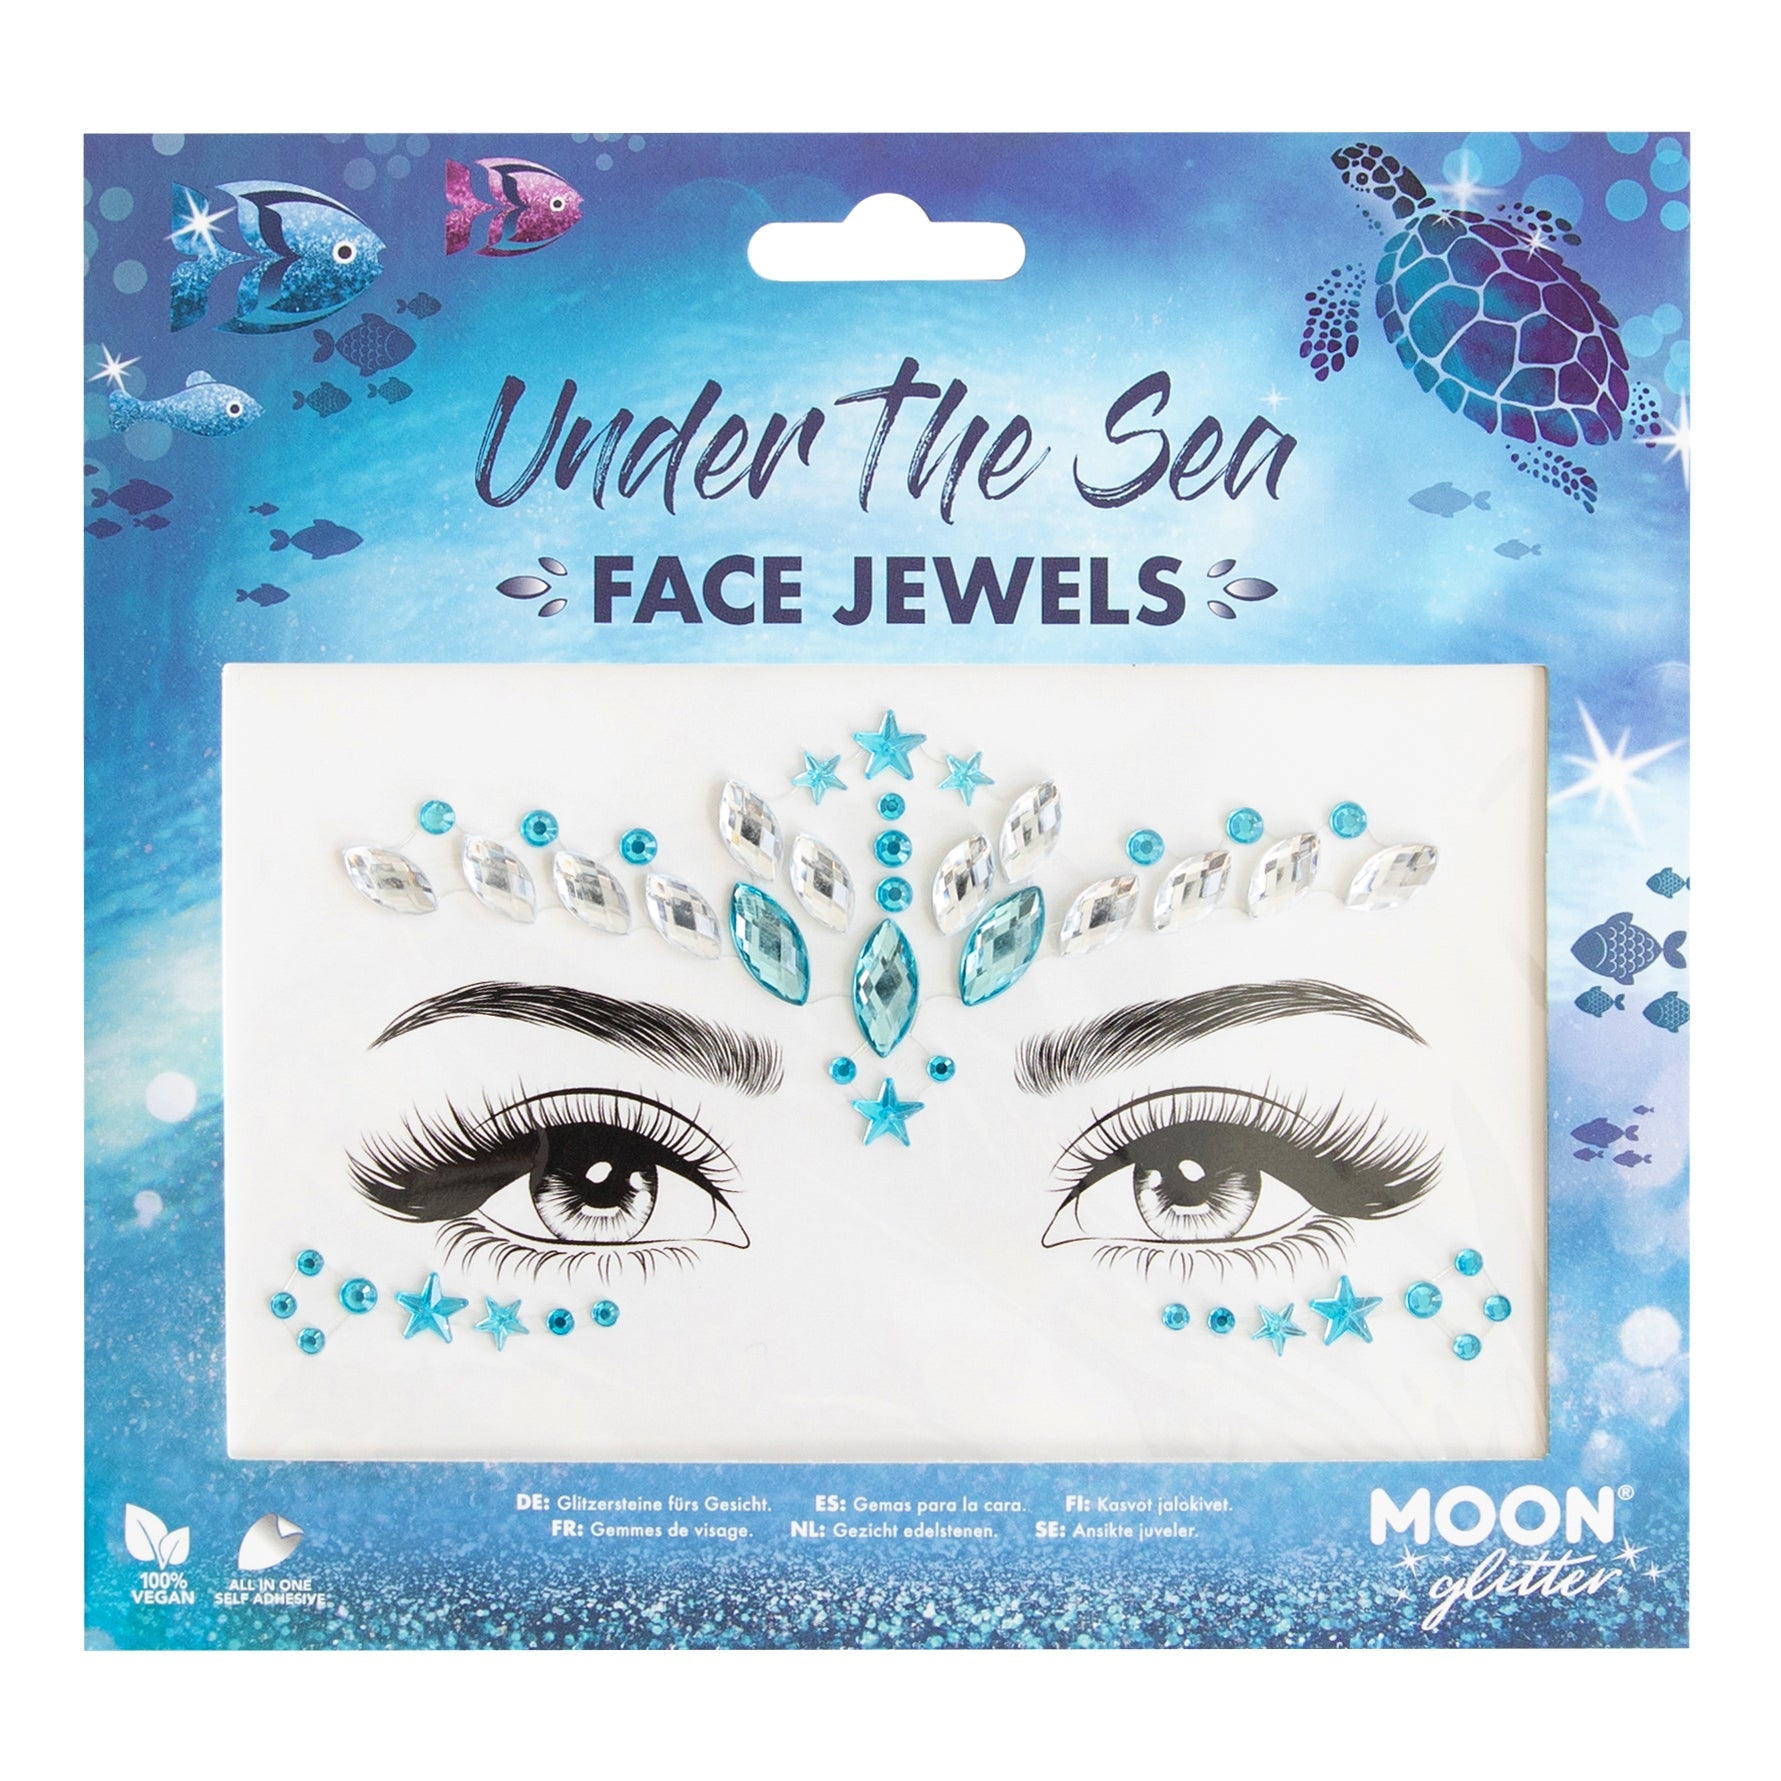 Under the Sea - Glitter Adhesive Face Gems, Jewels and Rhinestones